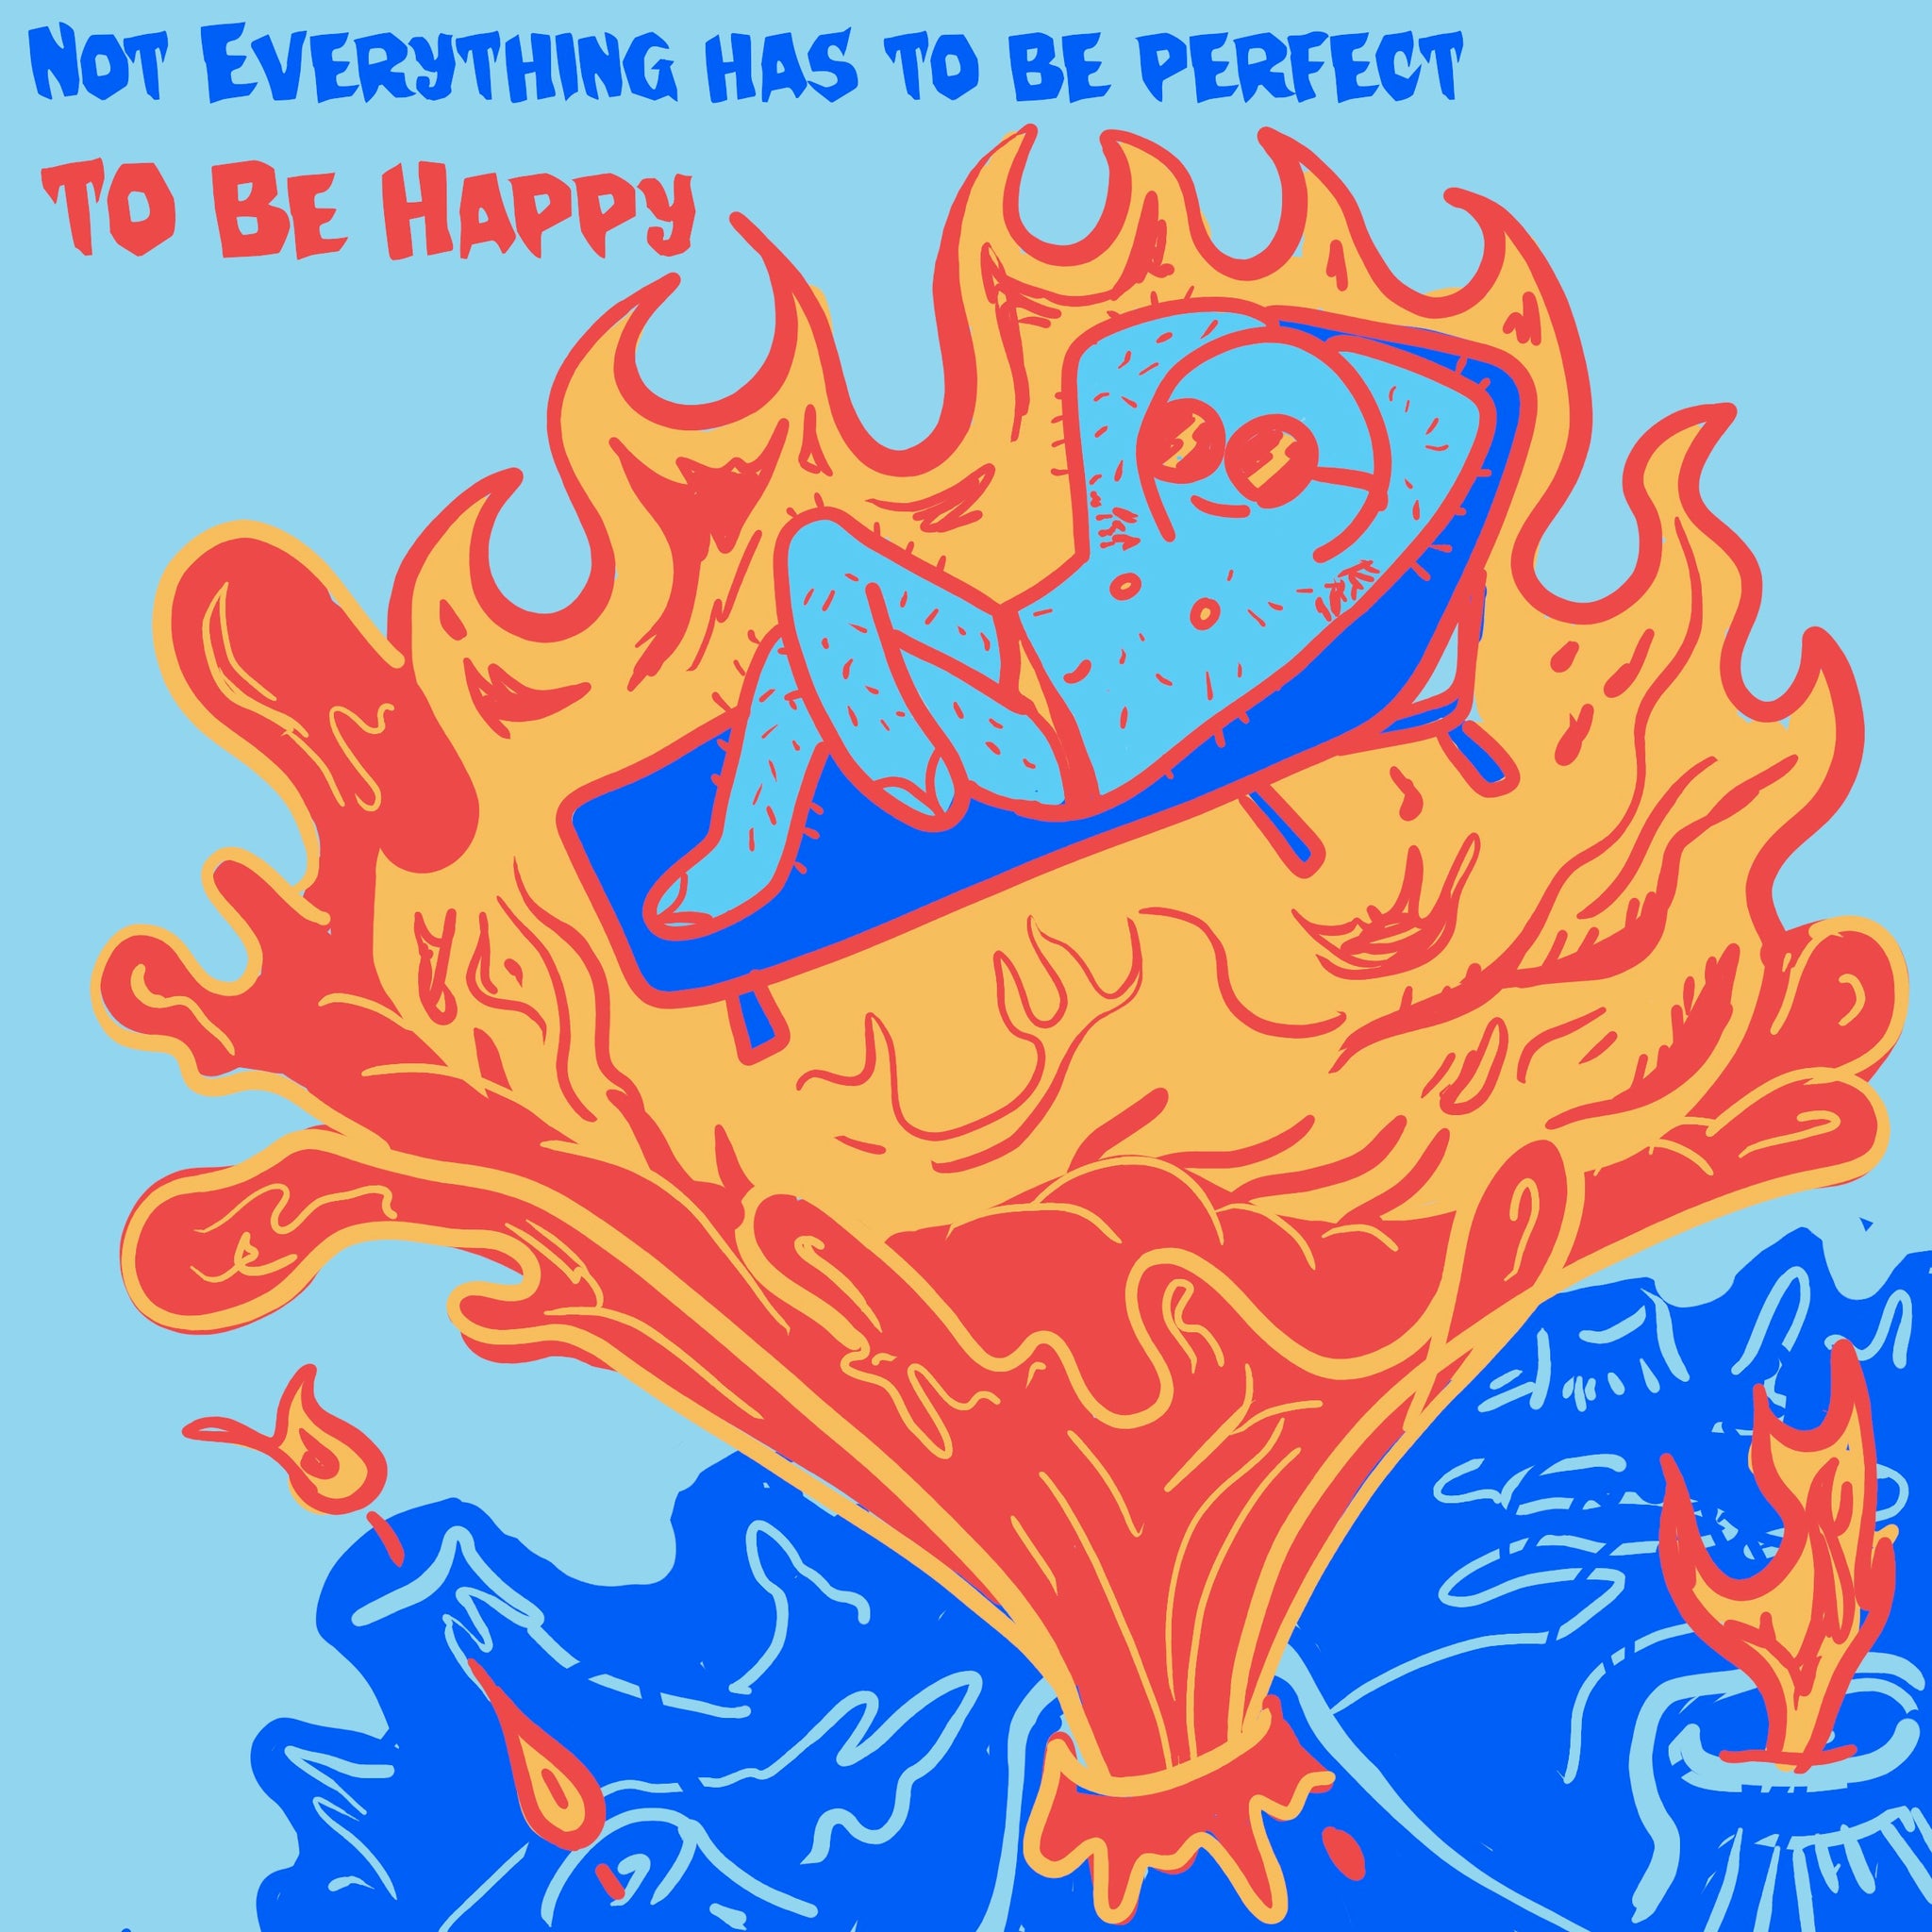 "Not Everything has to be Perfect to Be Happy" Print/ Poster - Pickled Ink Clothing